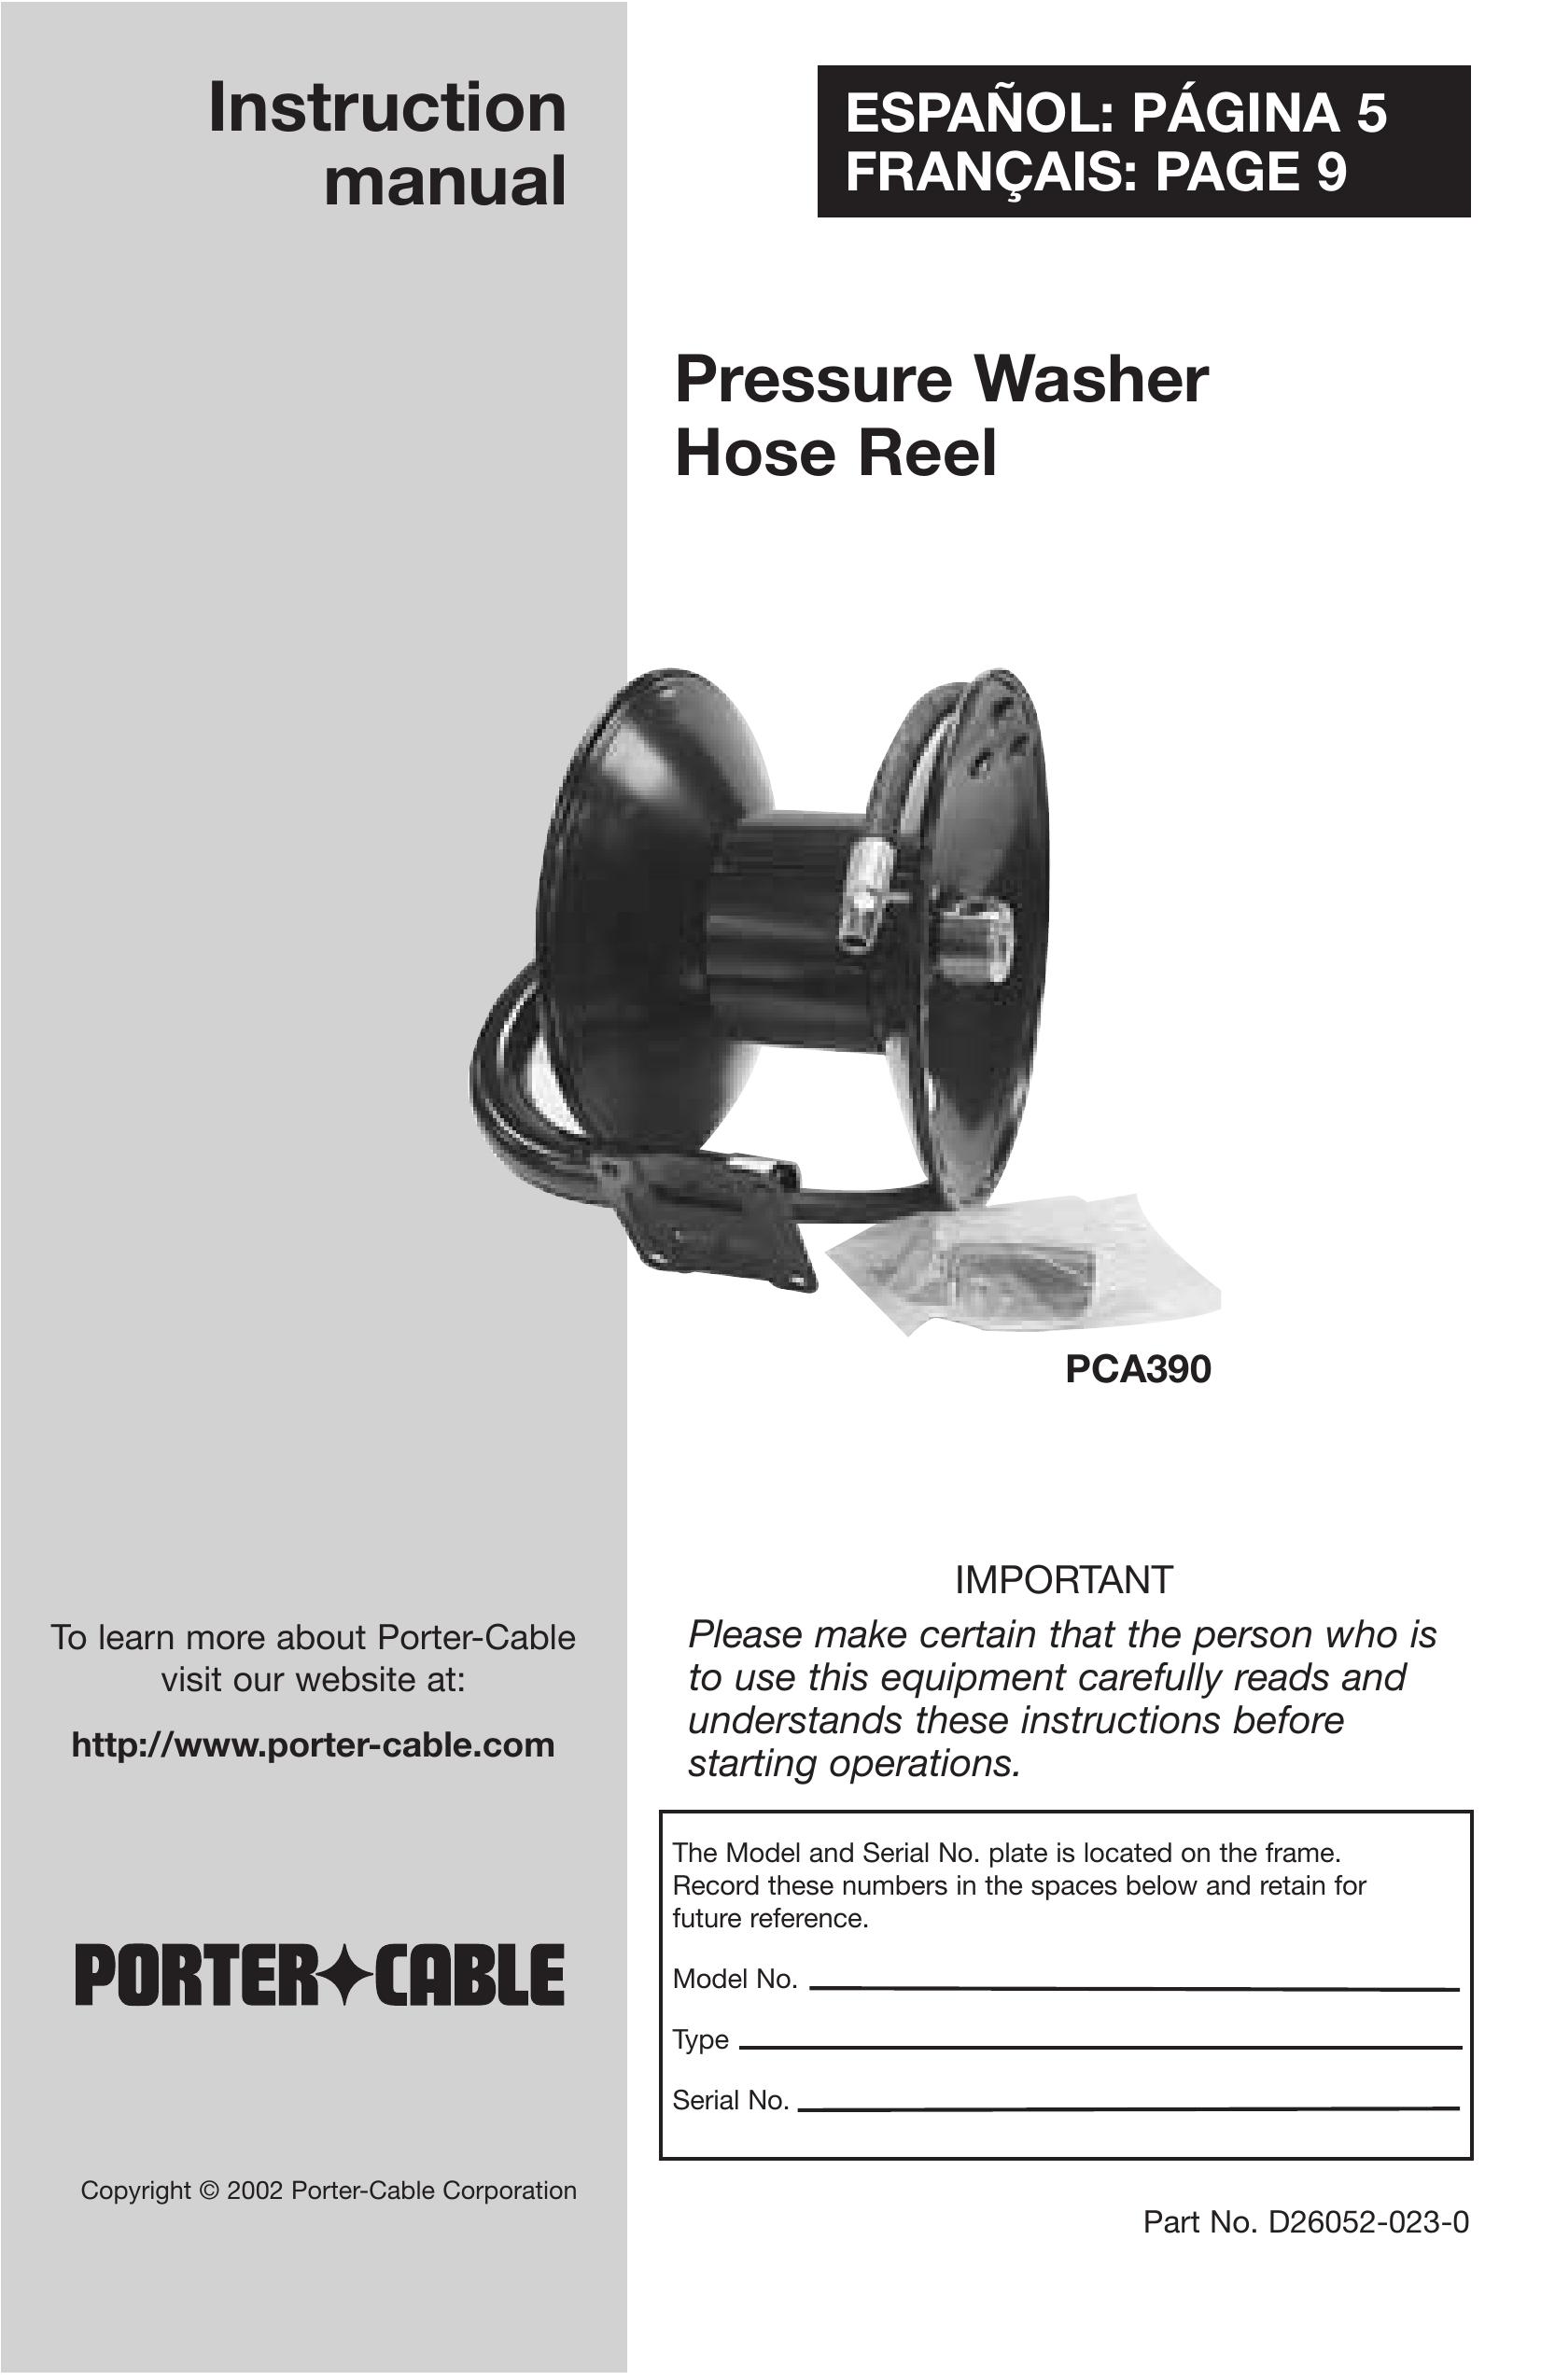 Porter-Cable PCA390 Pressure Washer User Manual